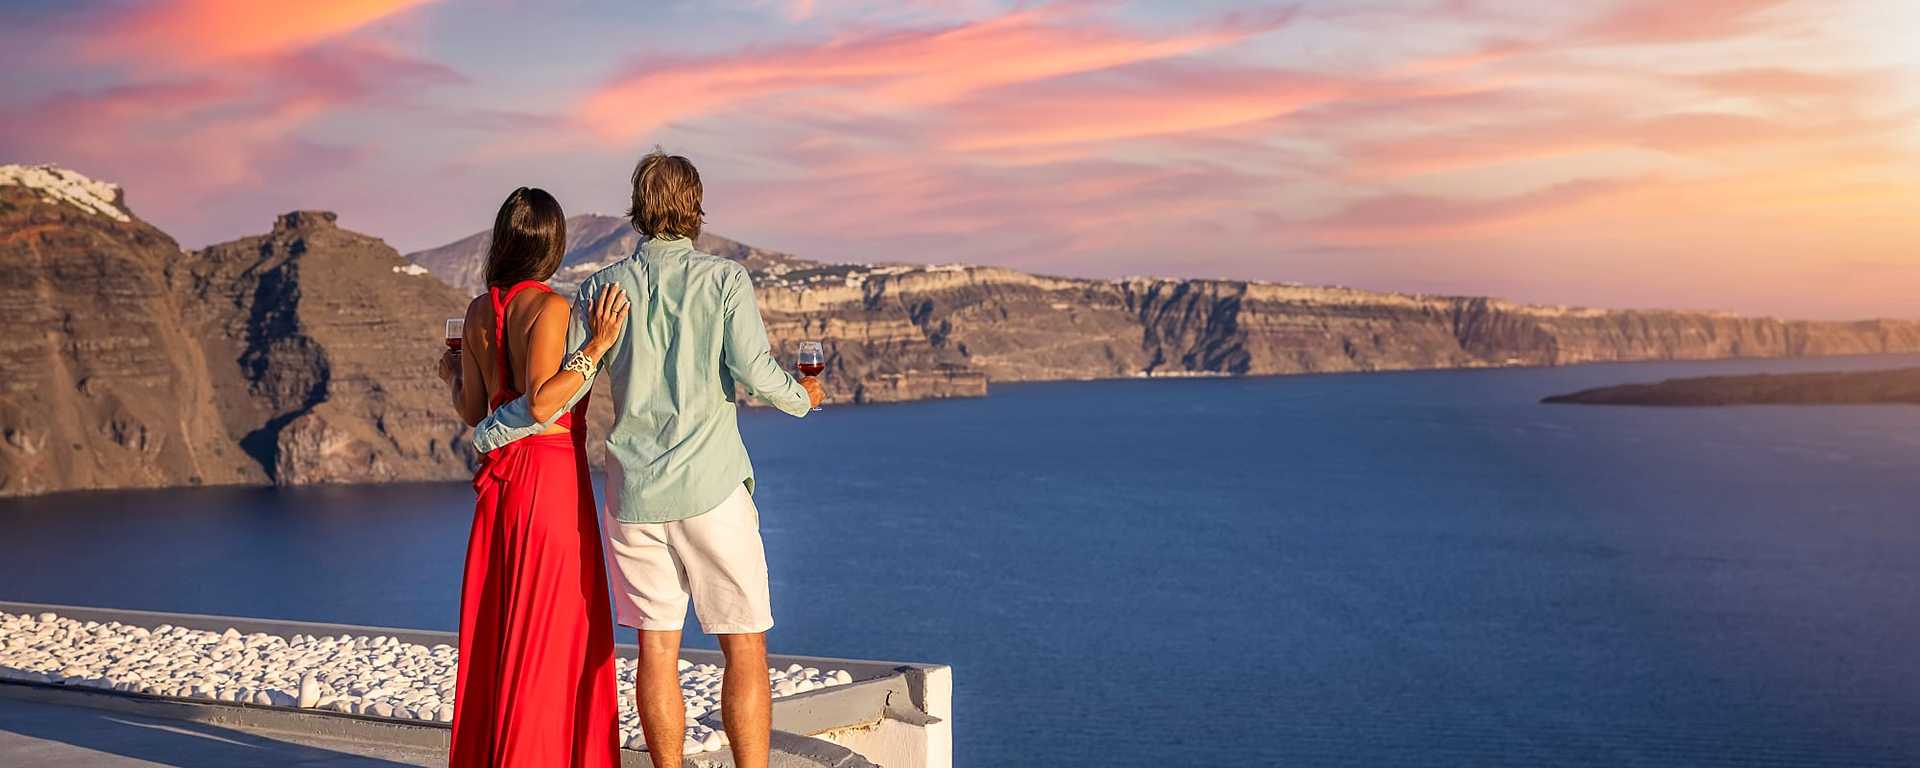 Couple drinking wine and watching the sunset in Santorini, Greece